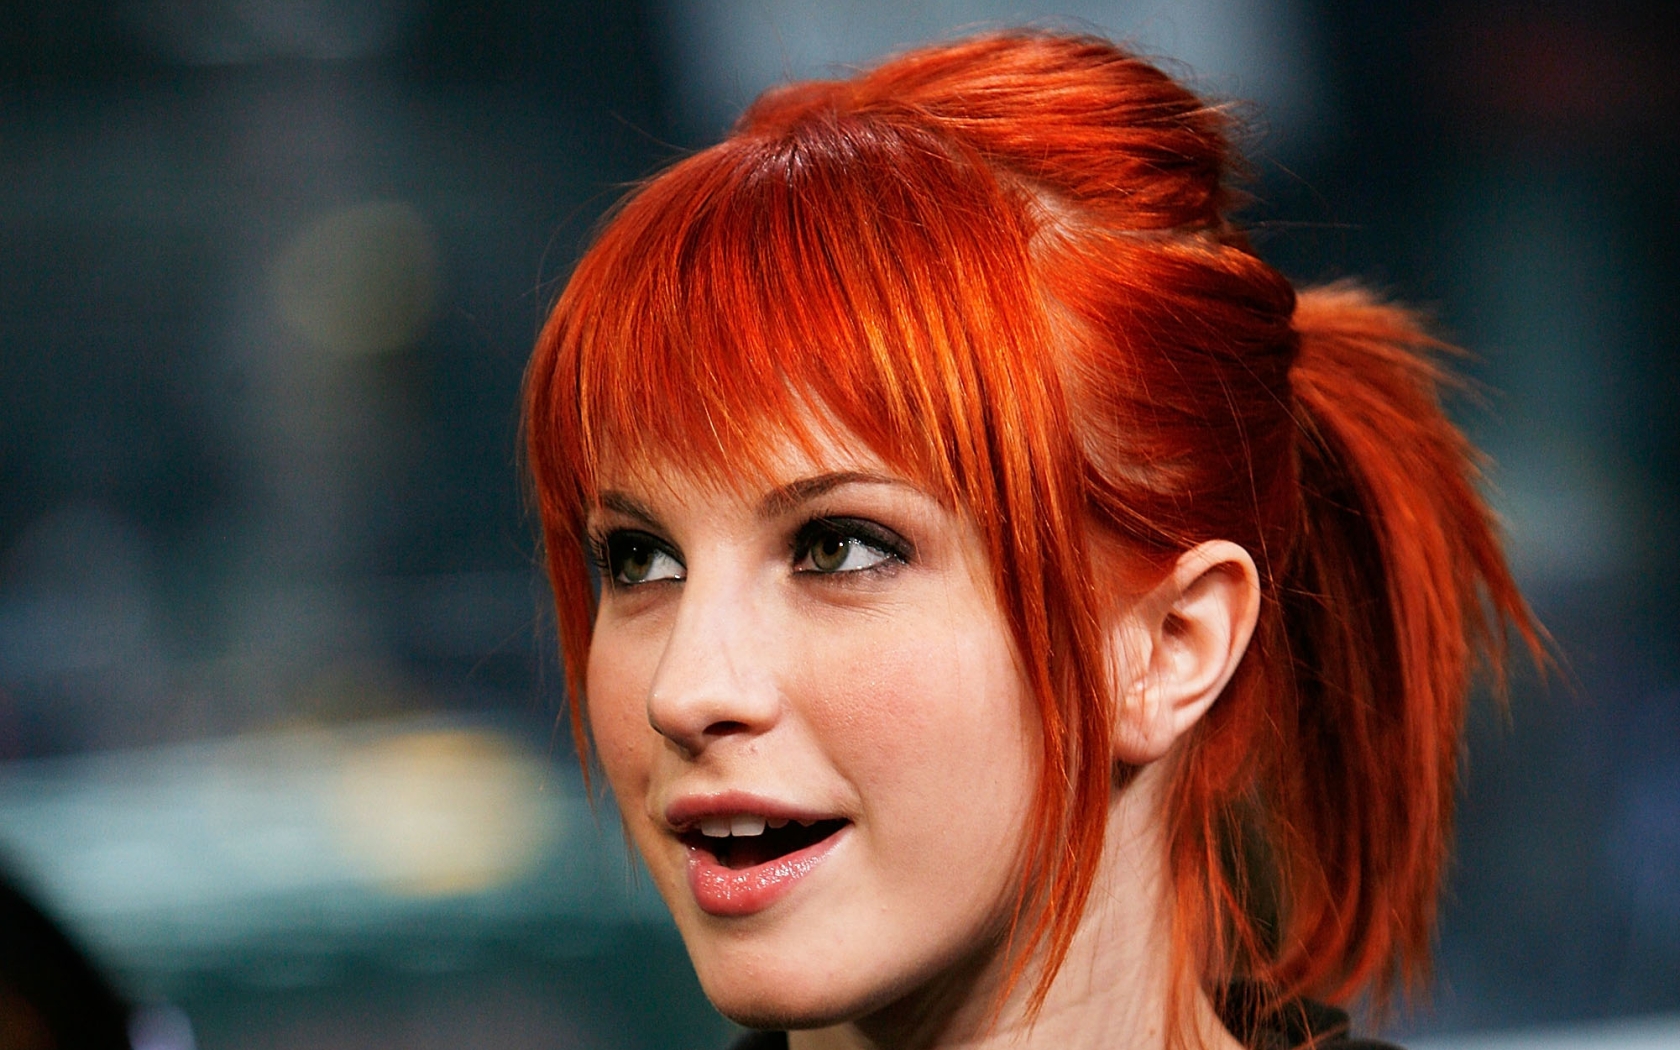 Best Hayley Williams Background for mobile